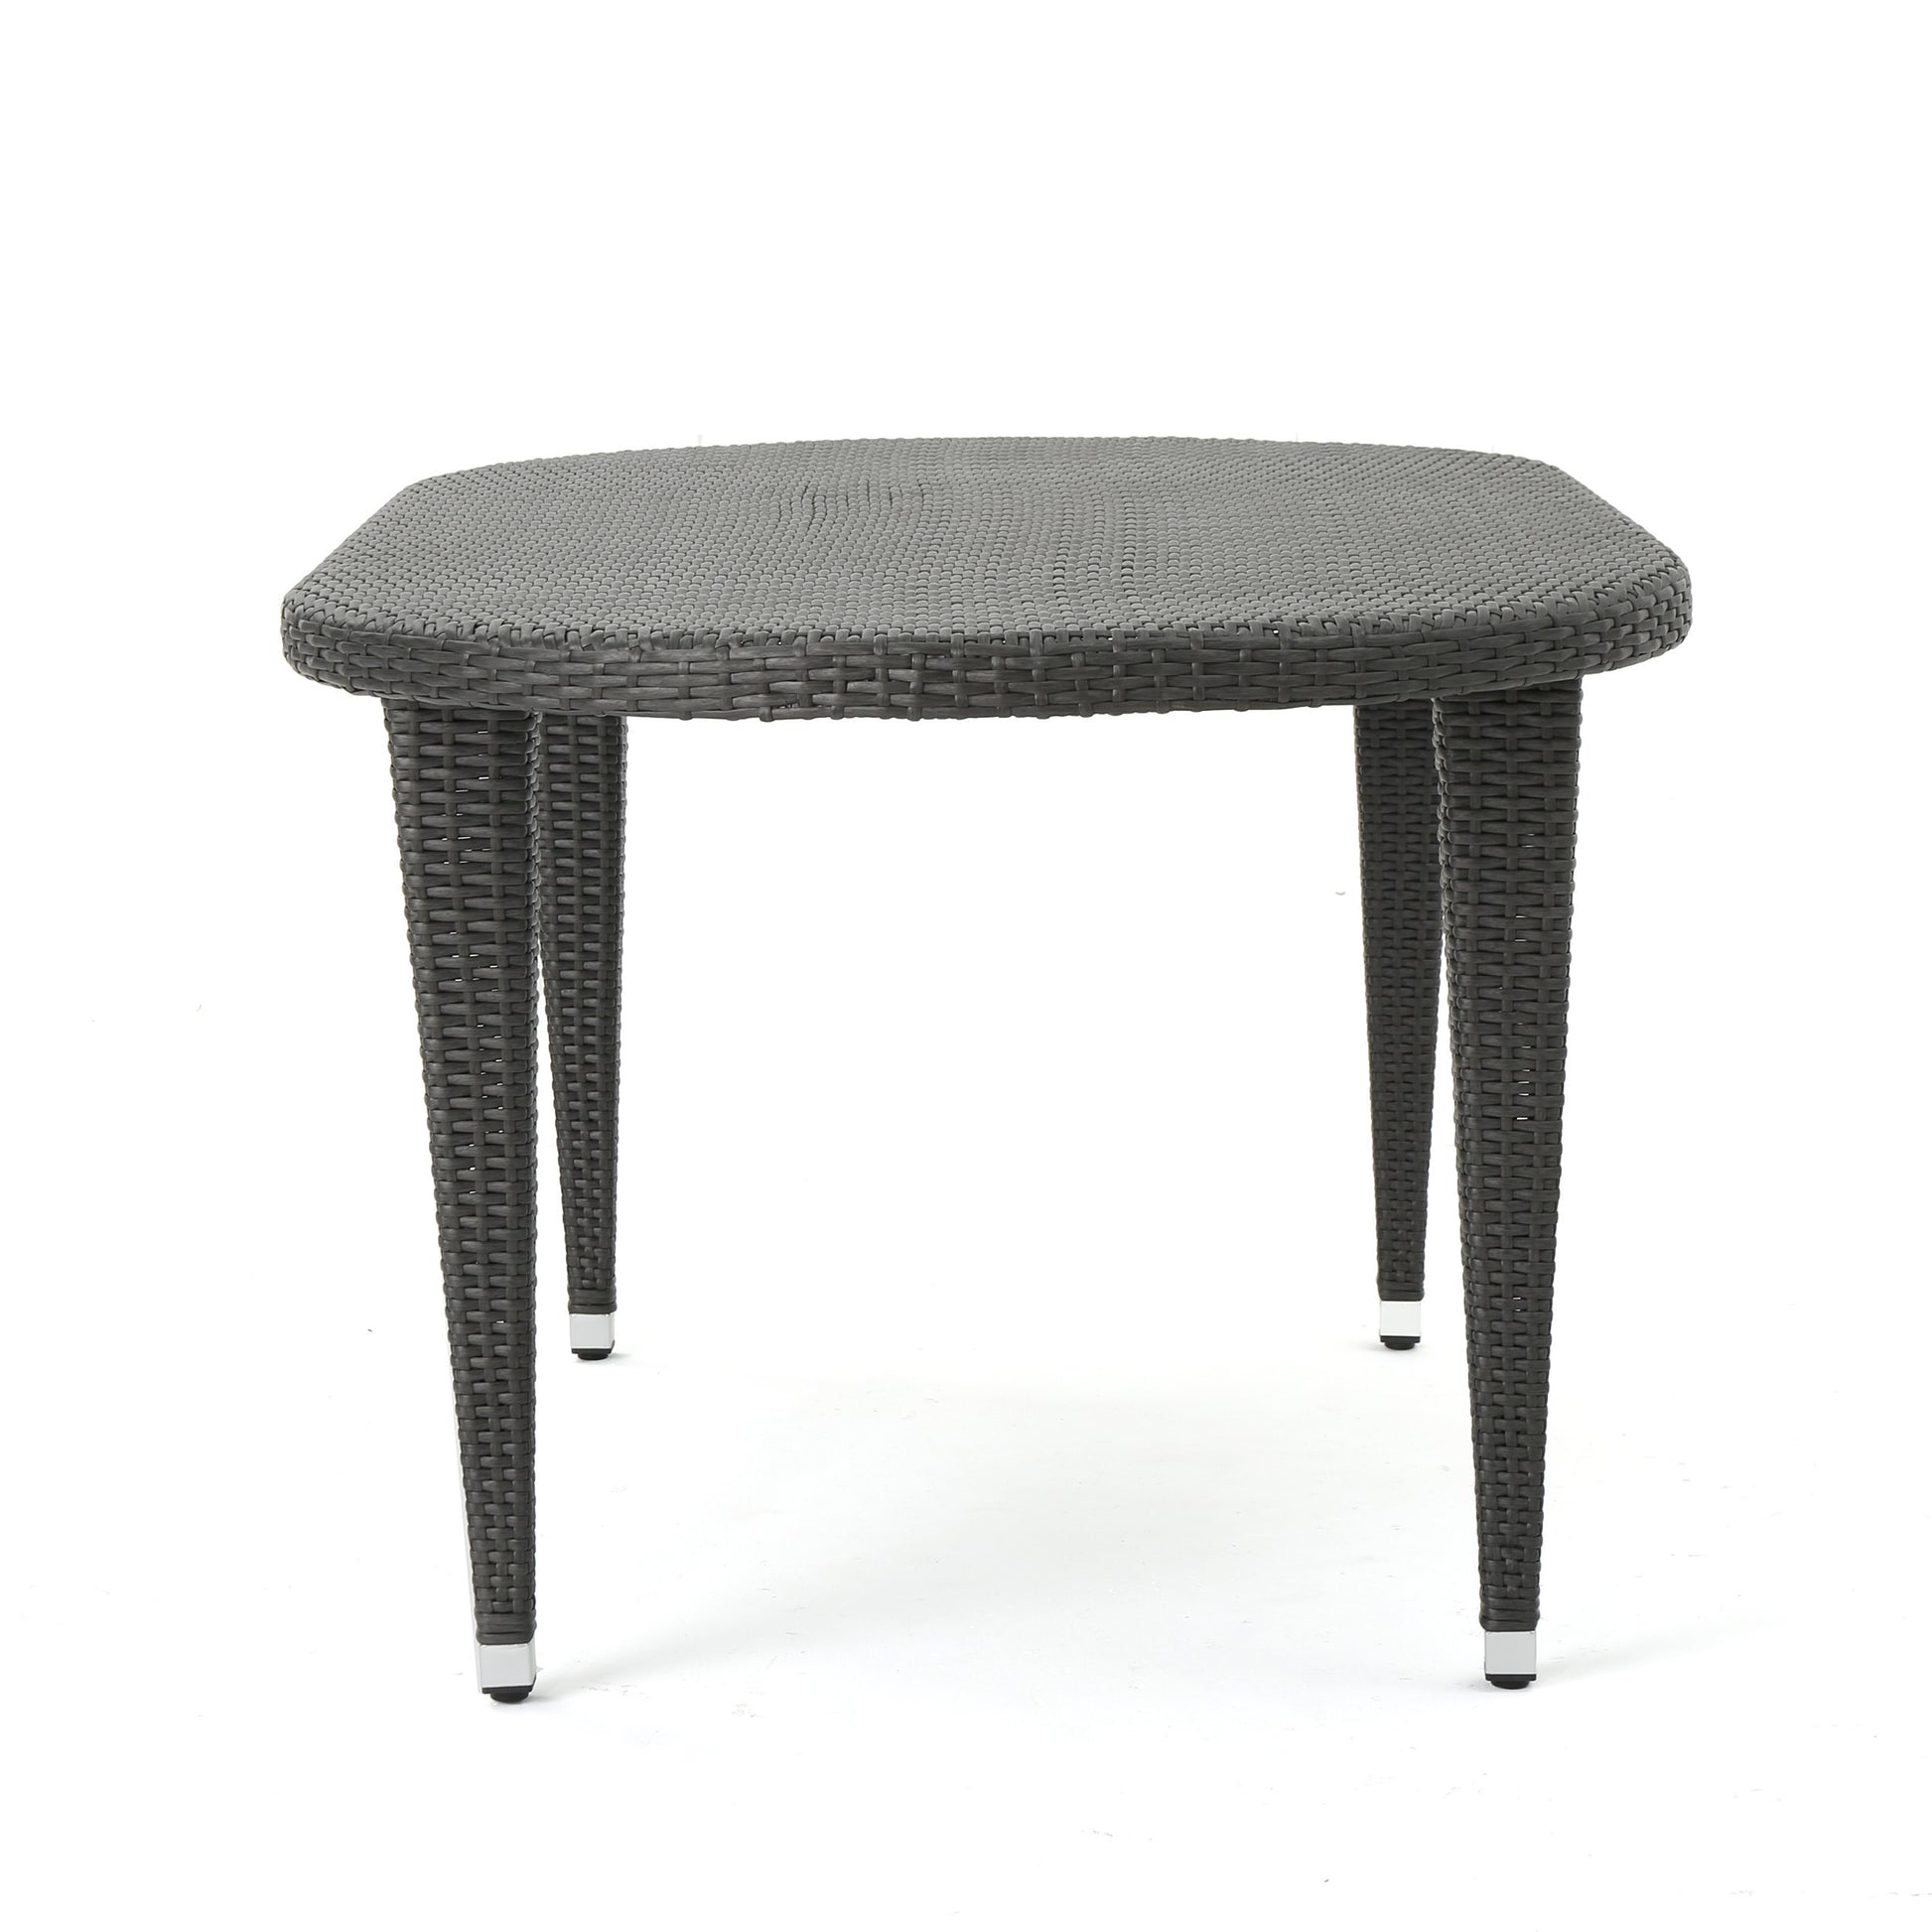 Dominica 6" Oval Dining Table - Grey Pe Rattan